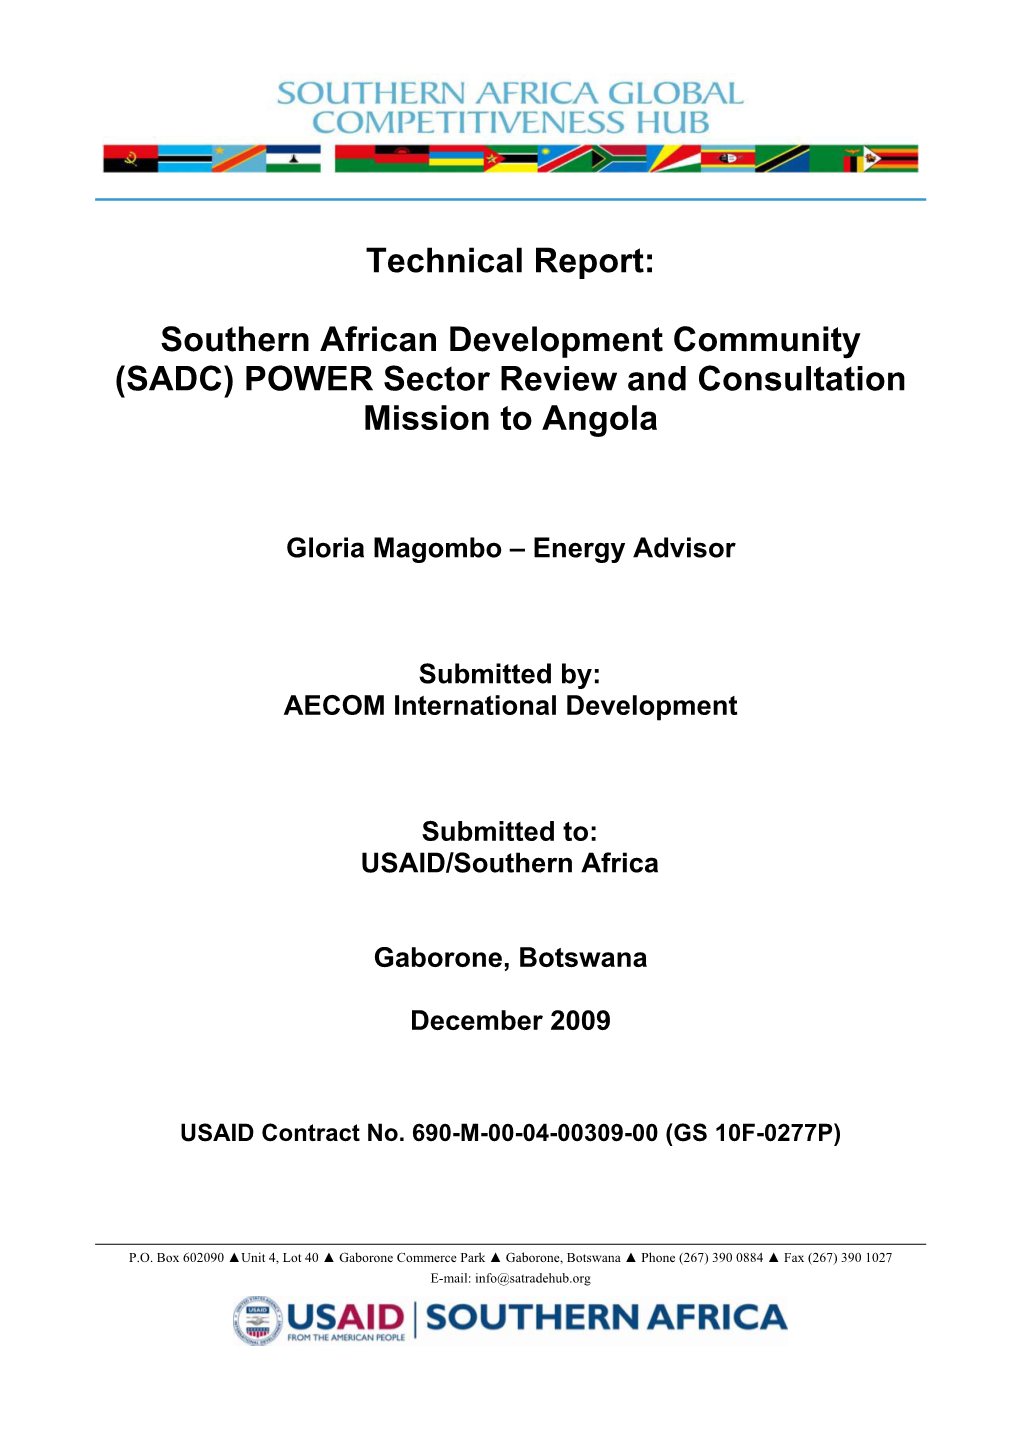 Technical Report SADC Angola Power Review